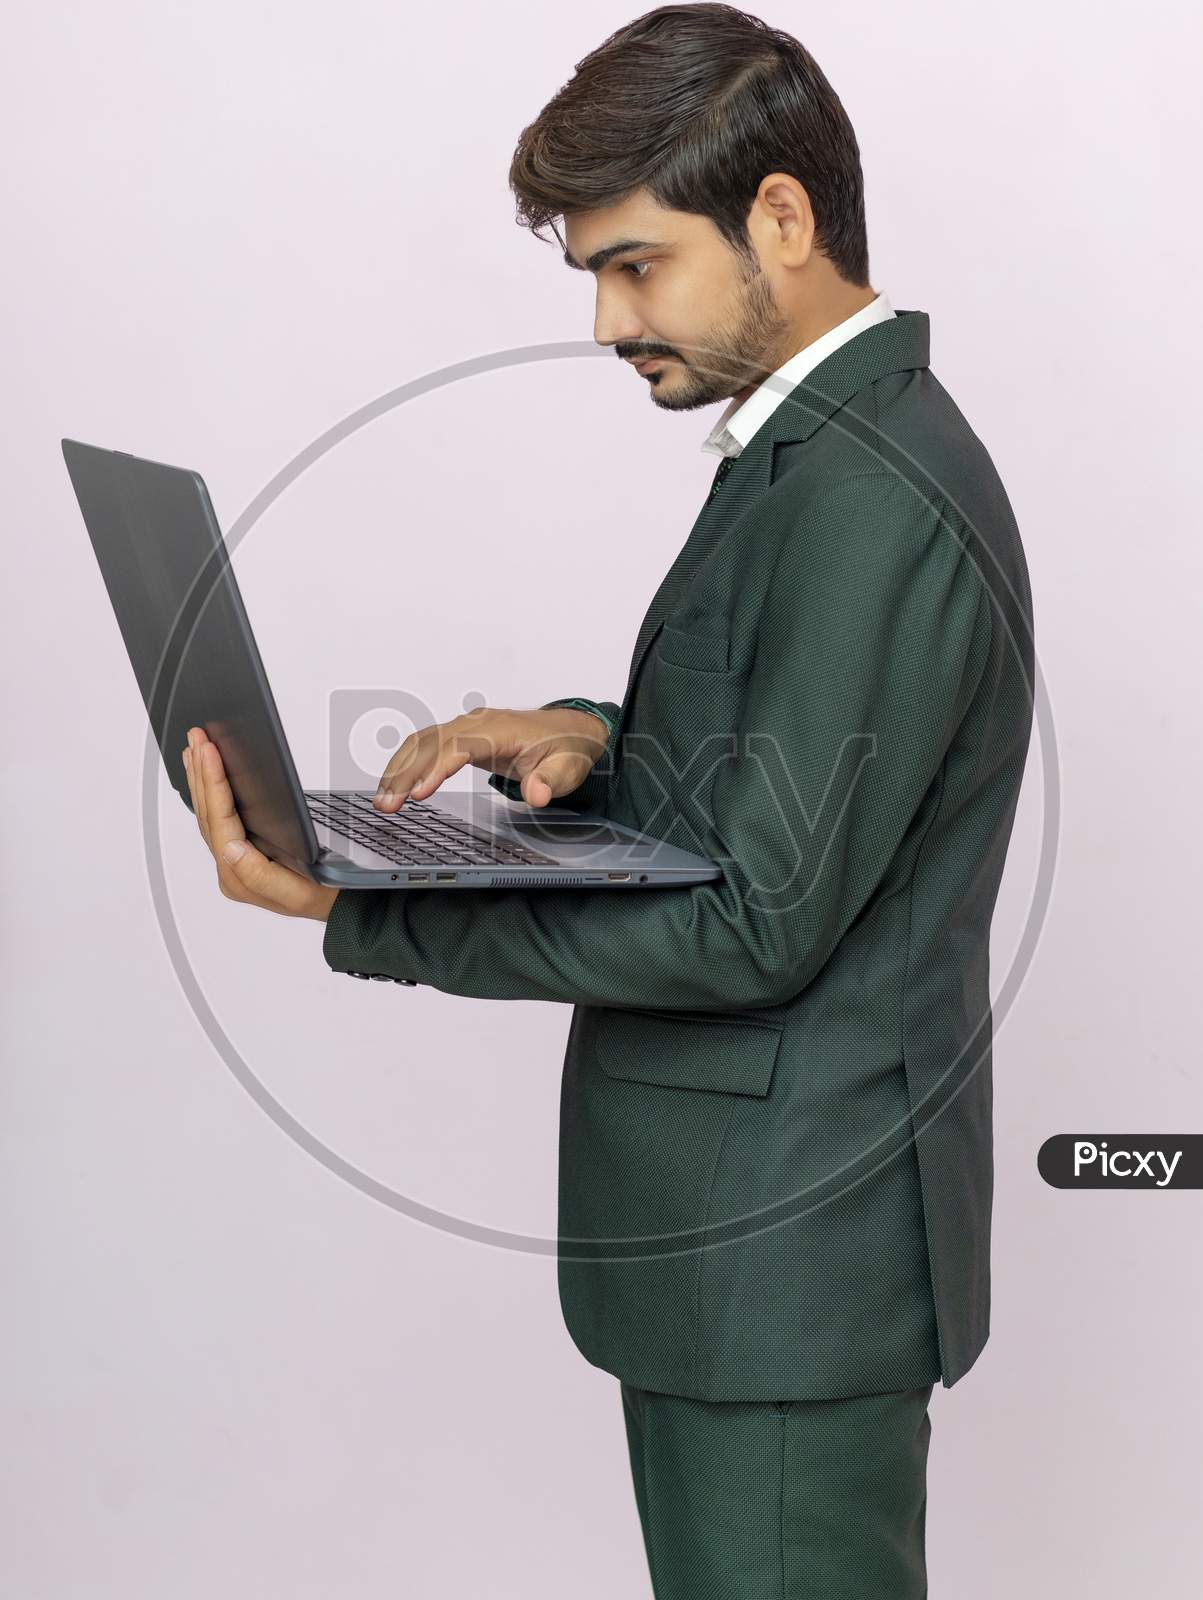 Photo Of Thoughtful Focused Clever Interested Freelancer Holding Laptop With Hands  Working On Deadline Project Isolated Background.